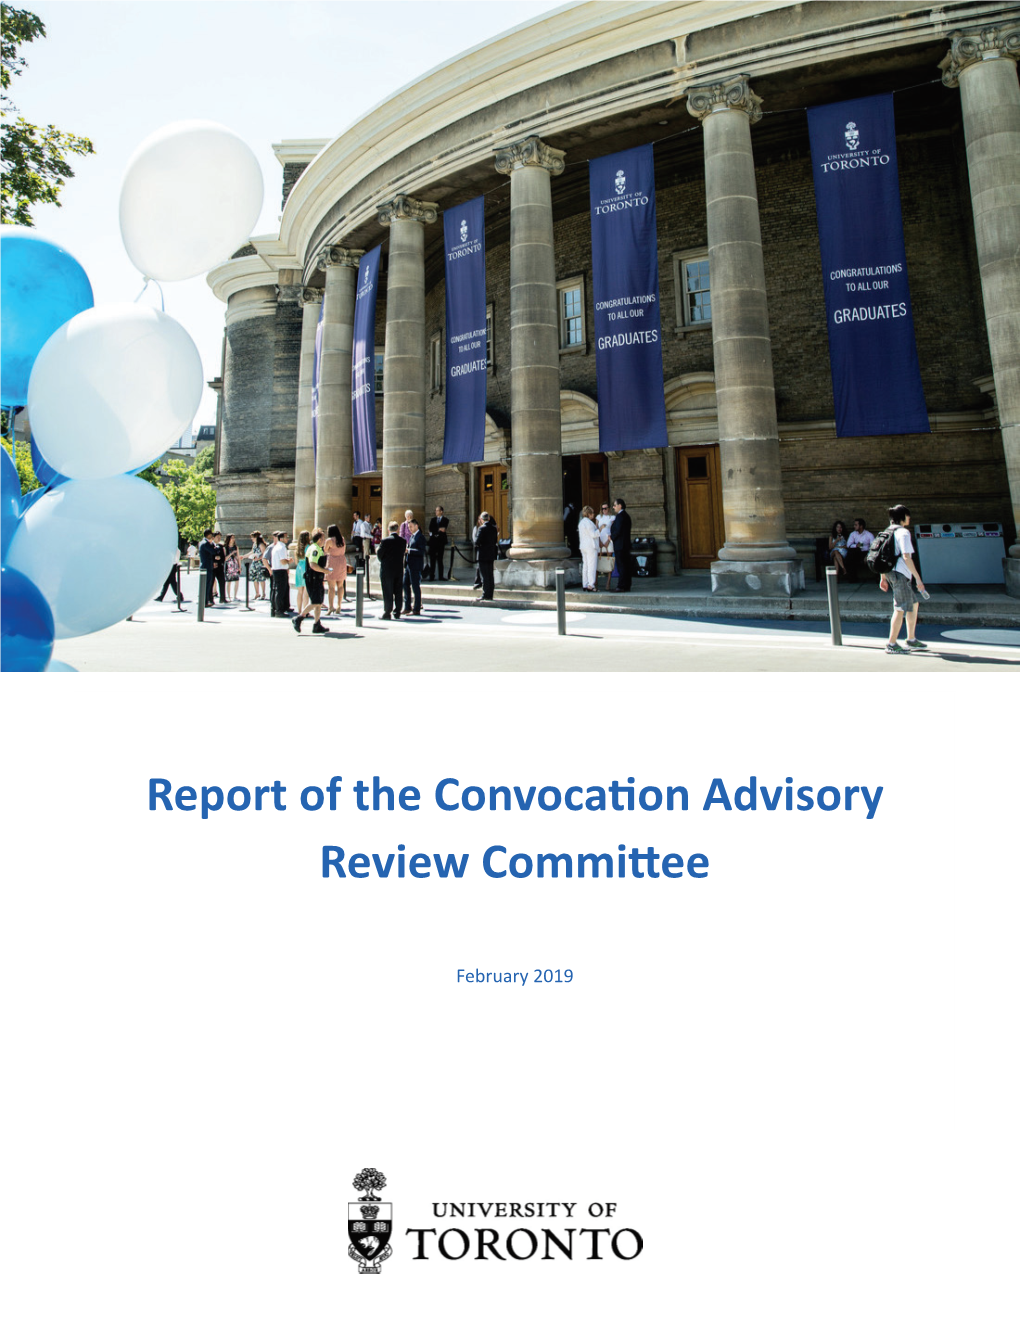 Report of the Convocation Advisory Review Committee